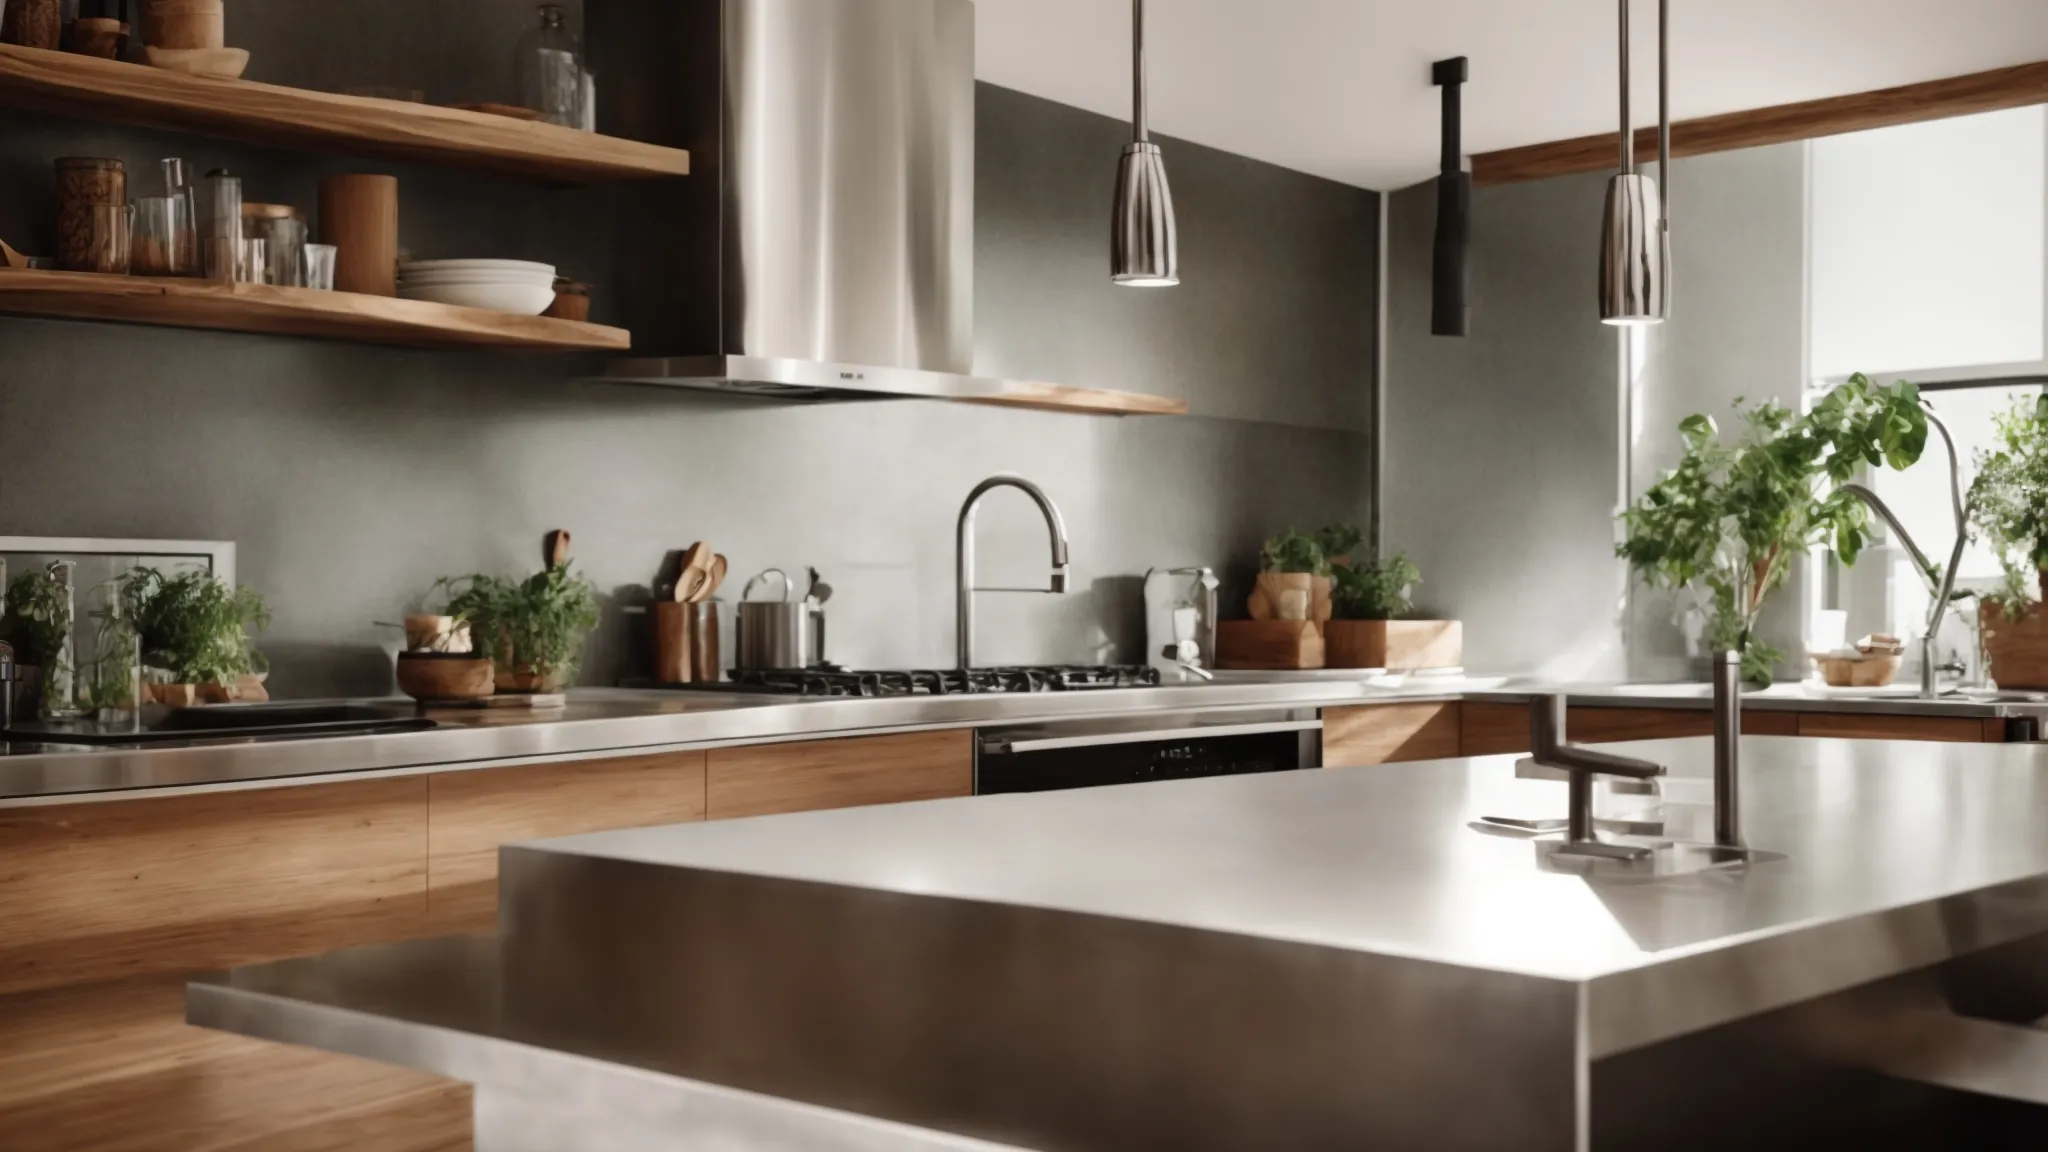 a modern, eco-friendly kitchen featuring a sleek, low-flow faucet above a stainless steel sink and an energy-efficient dishwasher to the side.